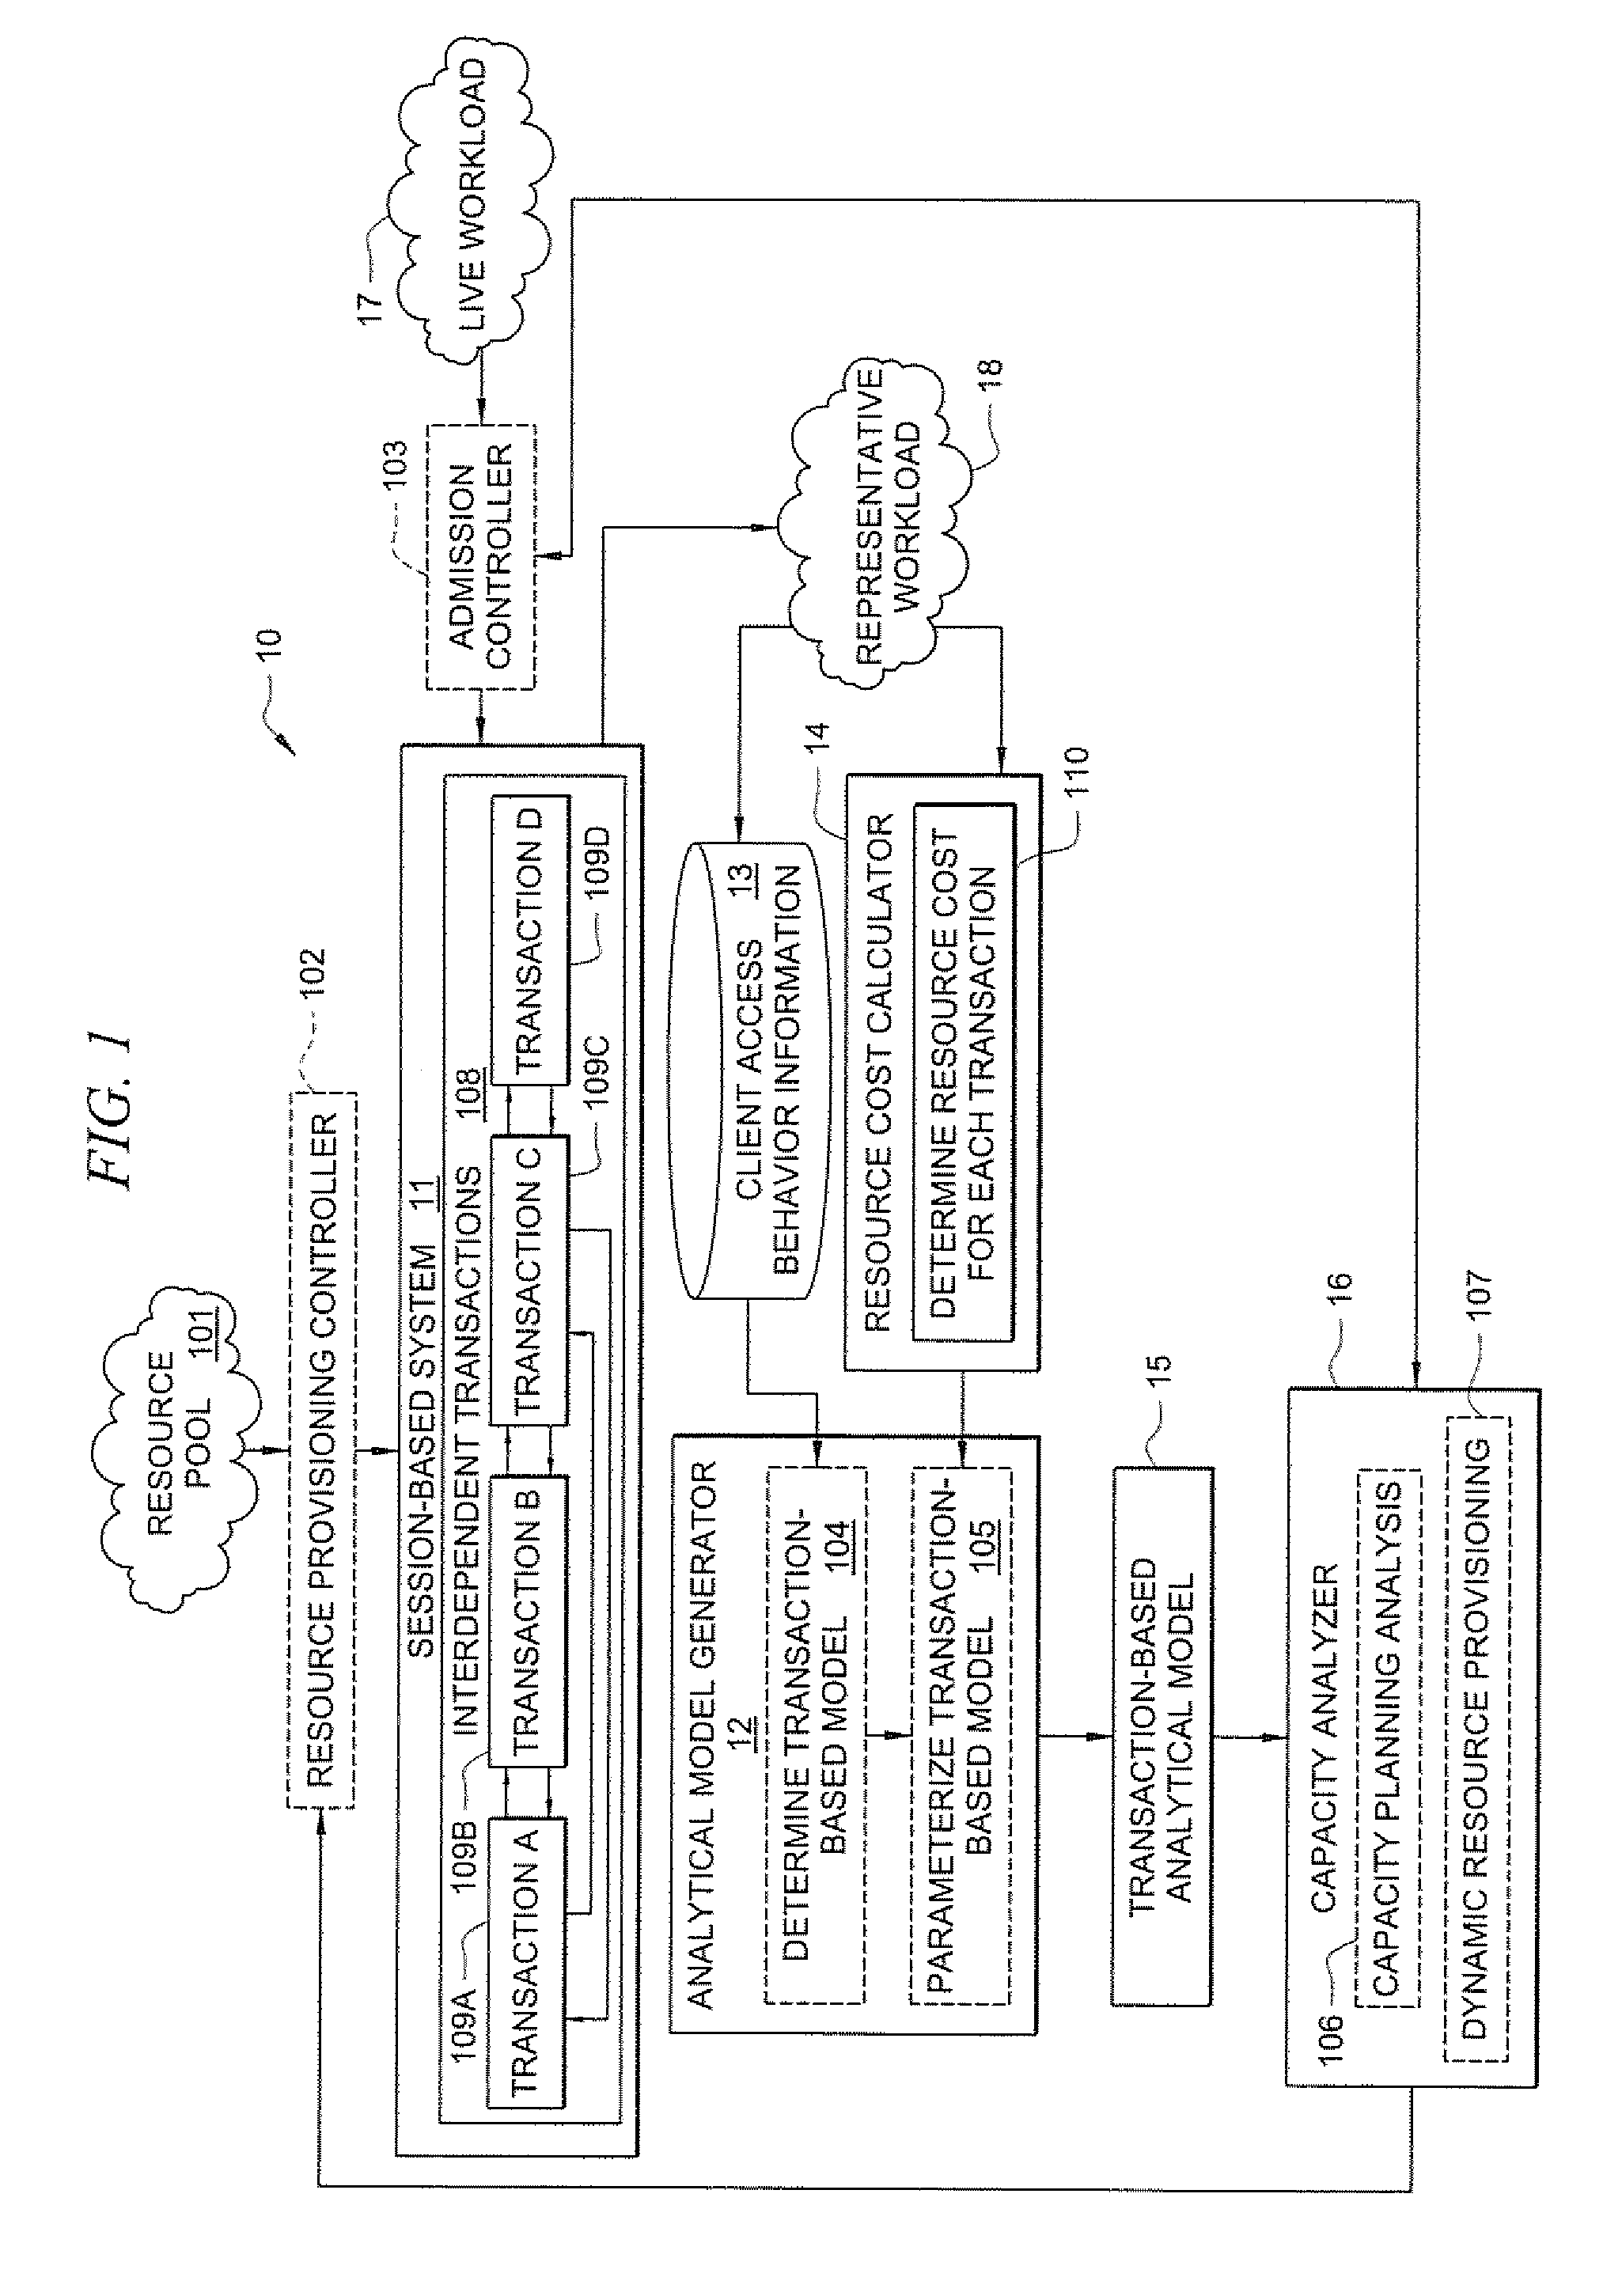 System and method for modeling a session-based system with a transaction-based analytic model